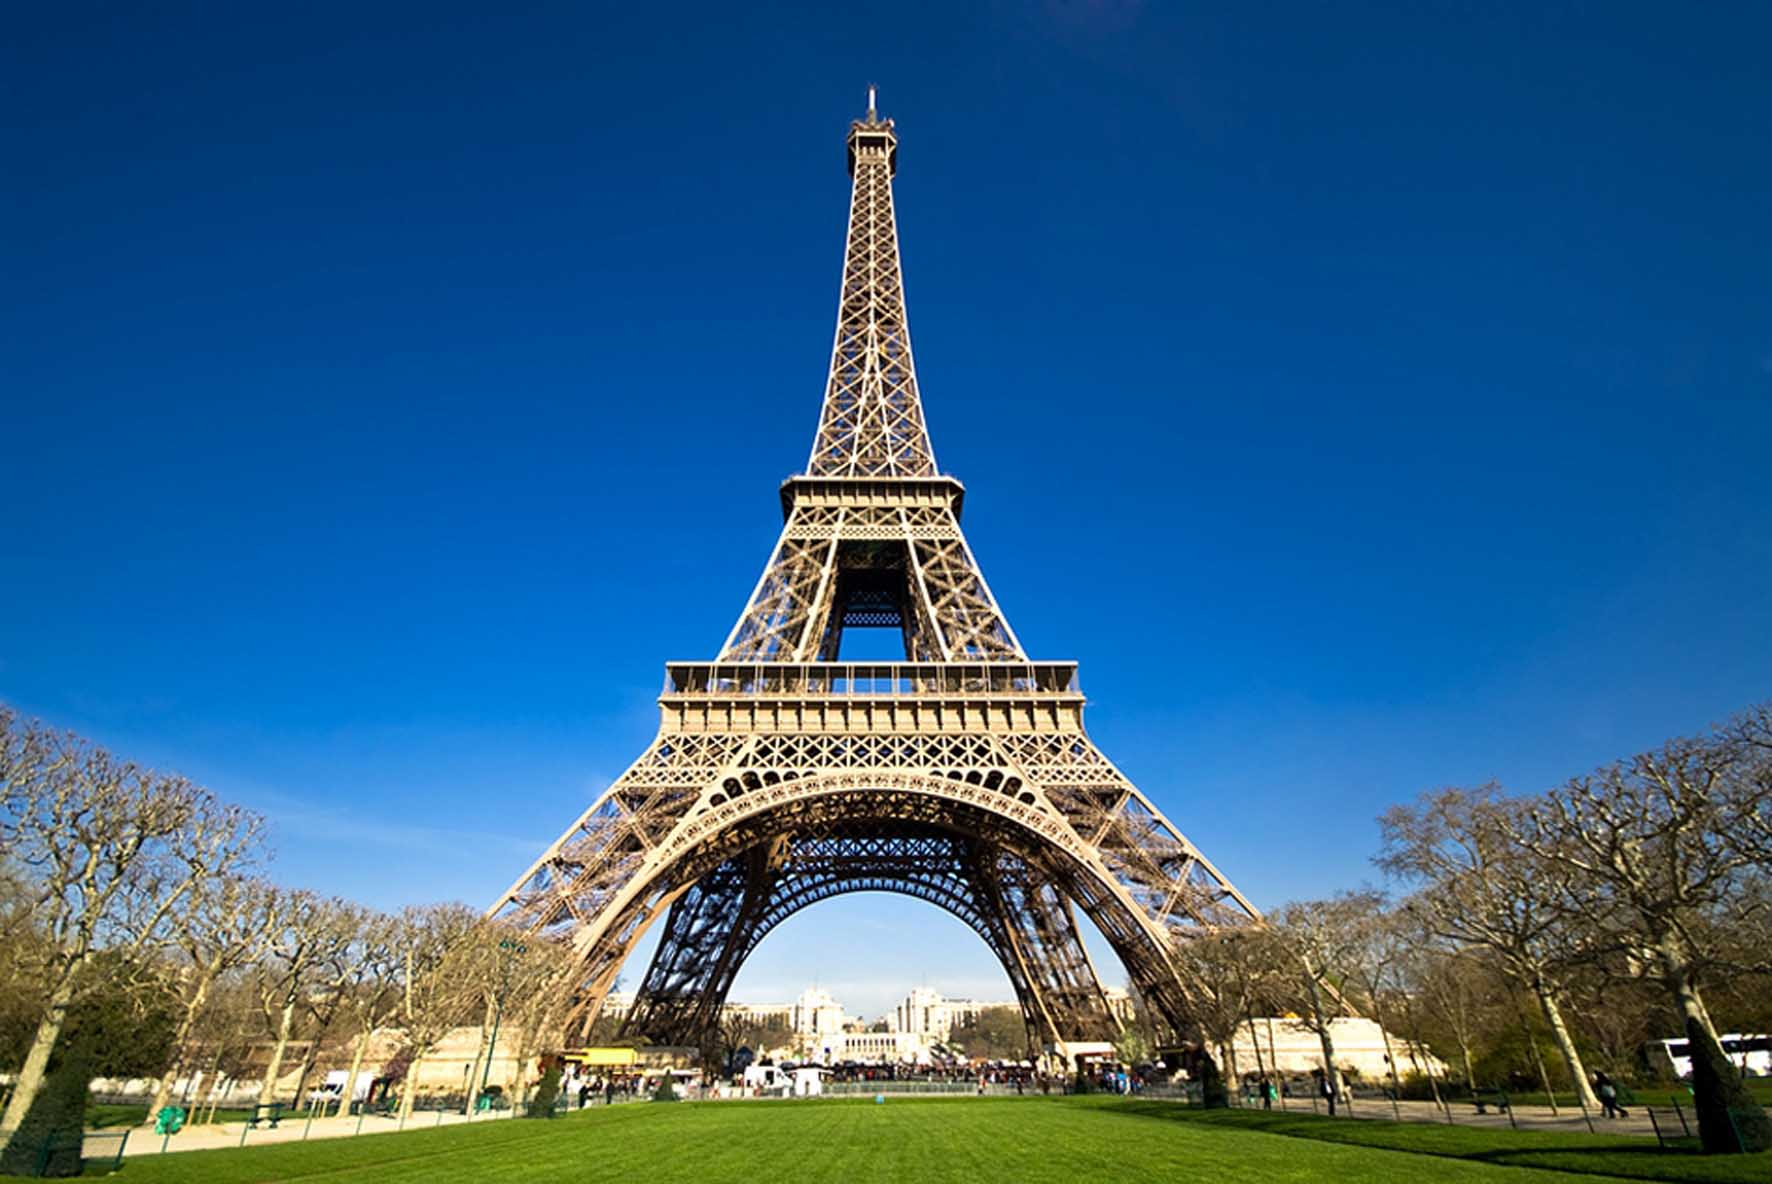 The 130th Anniversary of the Eiffel Tower | France Just ...